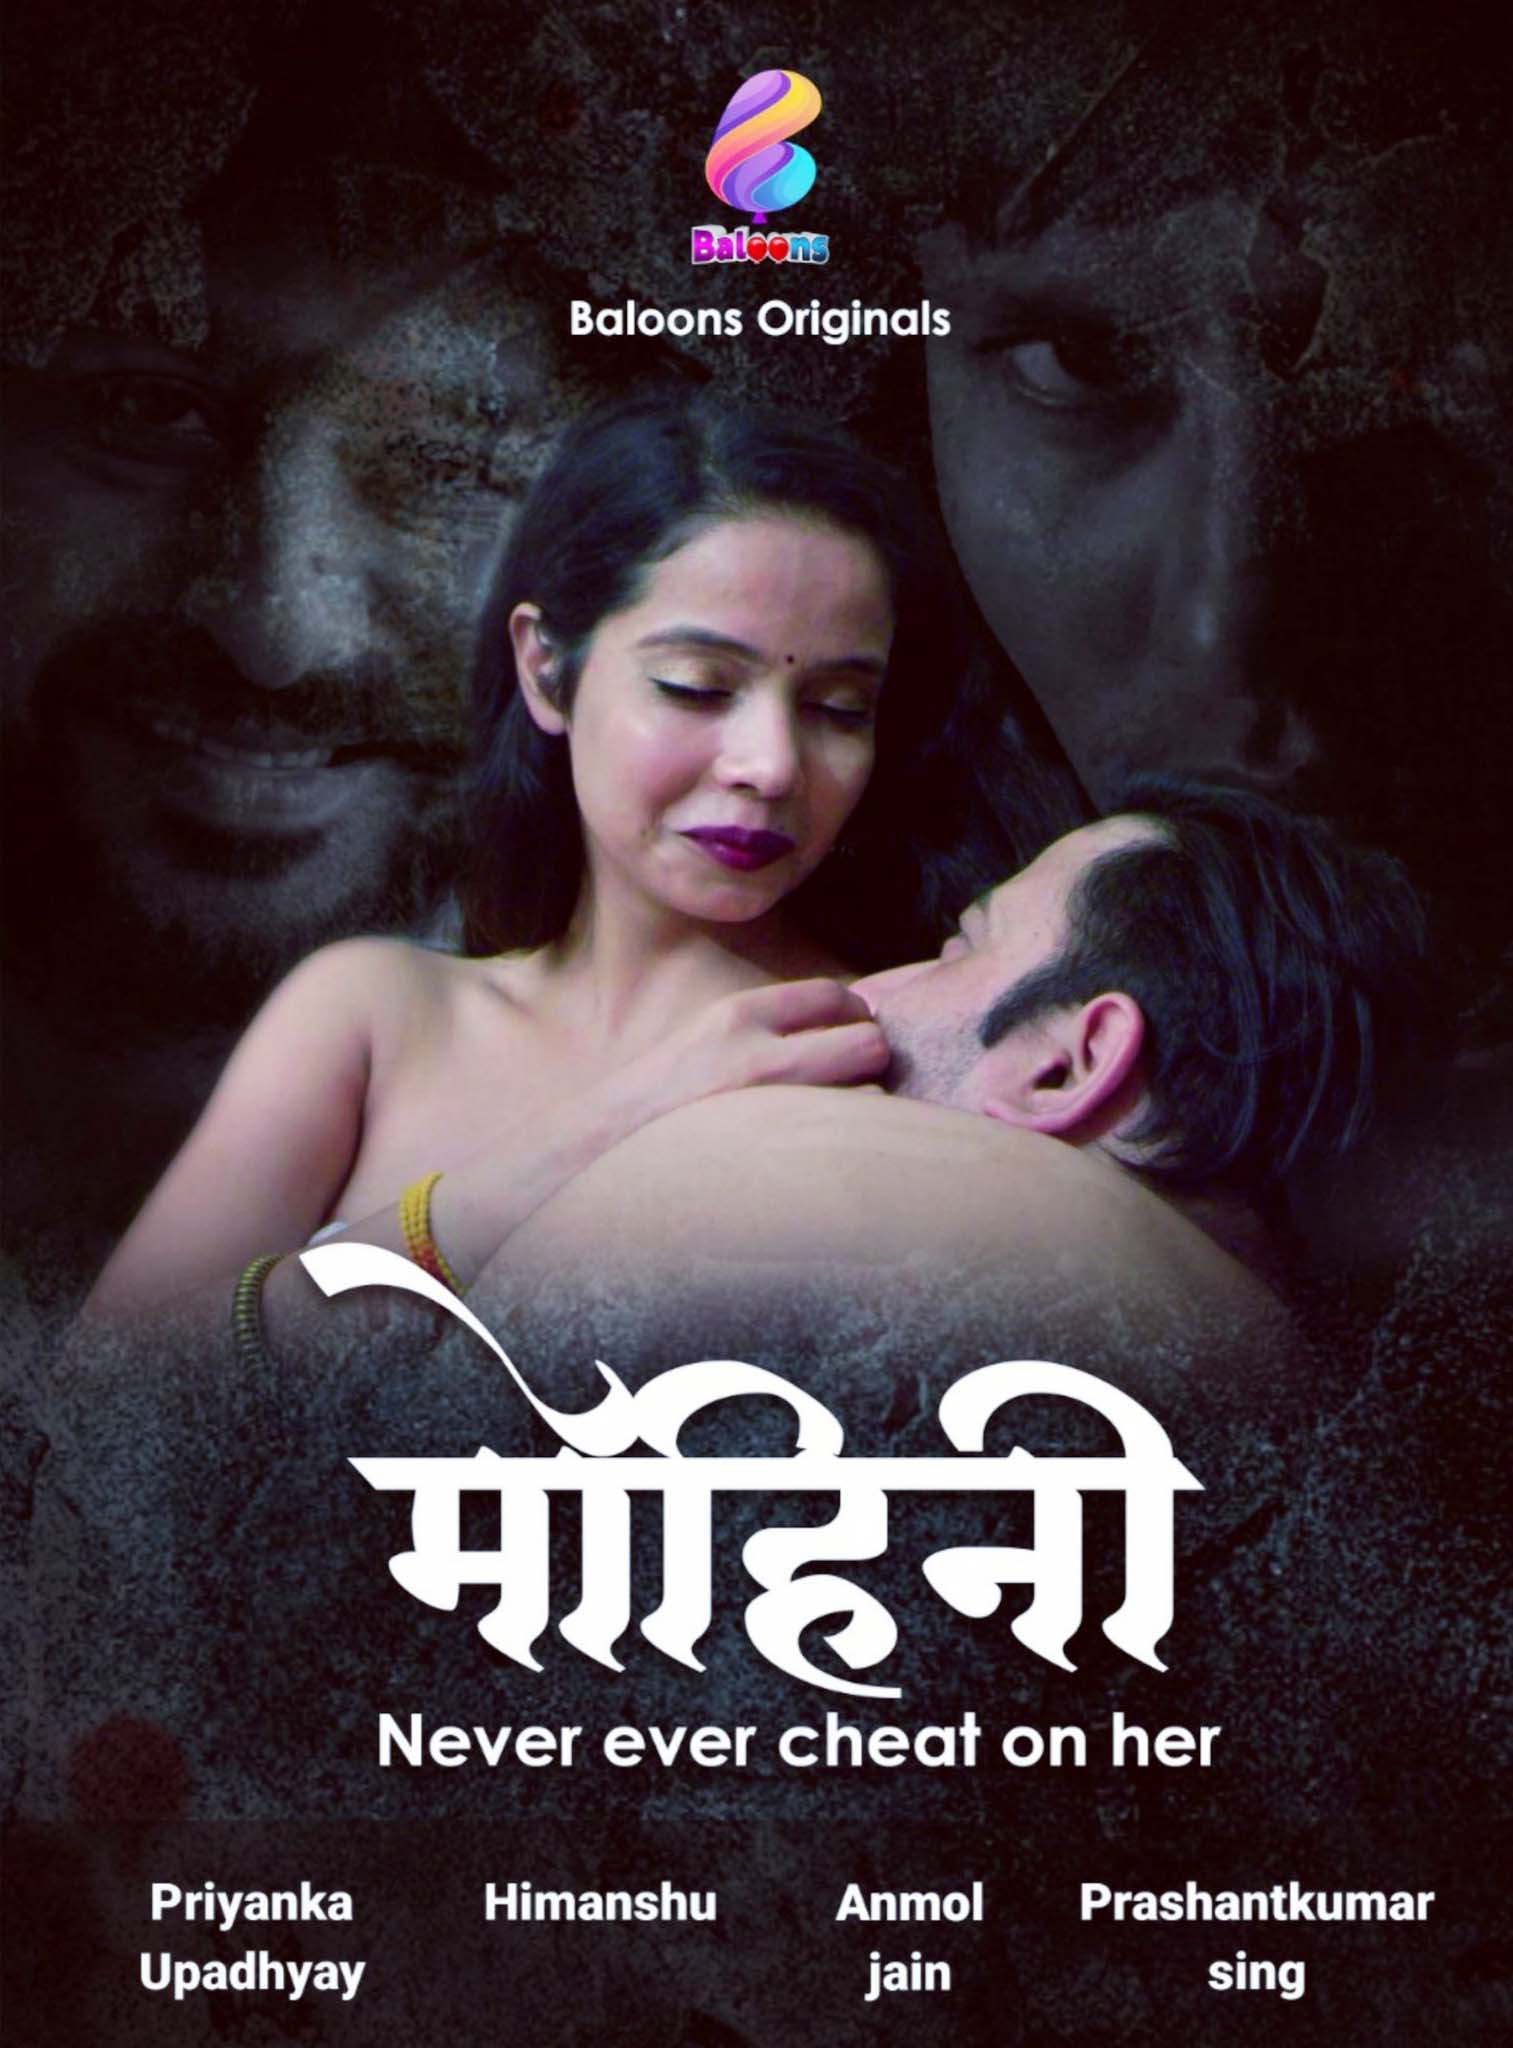 You are currently viewing Mohini 2020 Balloons Hindi S01E01 Hot Web Series 720p HDRip 100MB Download & Watch Online